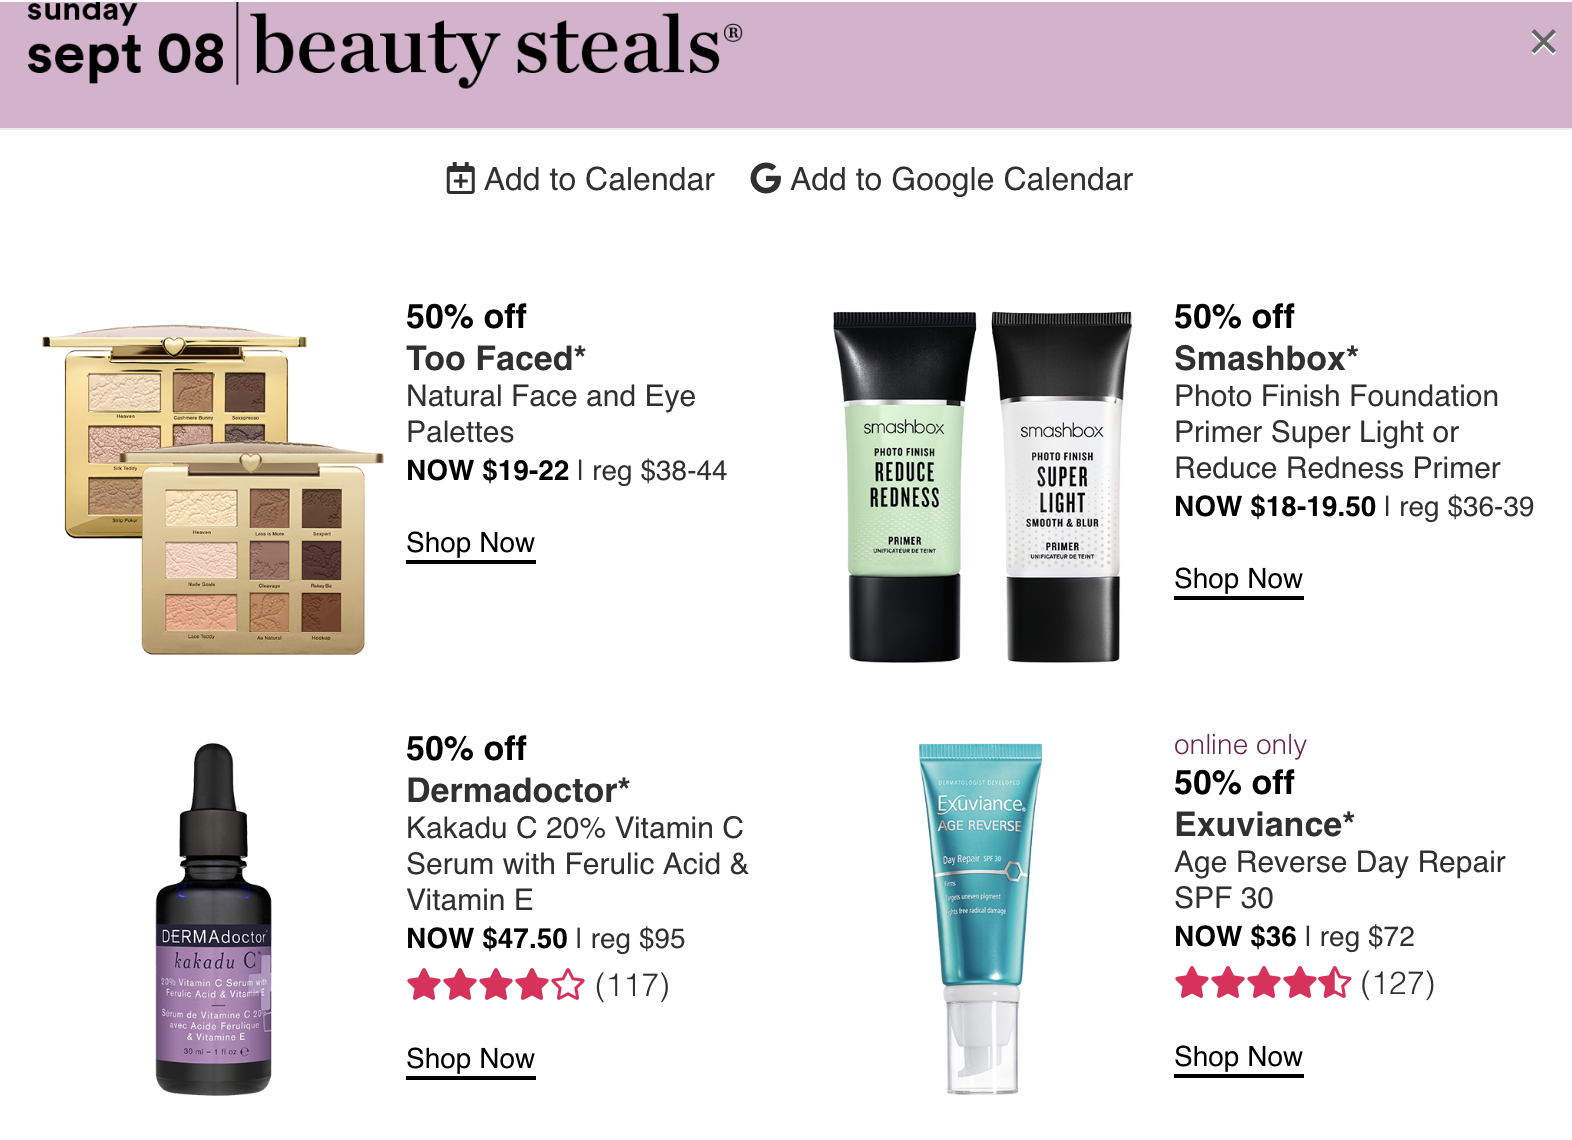 Ulta 21 Days of Beauty – DAY 8 (9/8 tomorrow) - Gift With Purchase